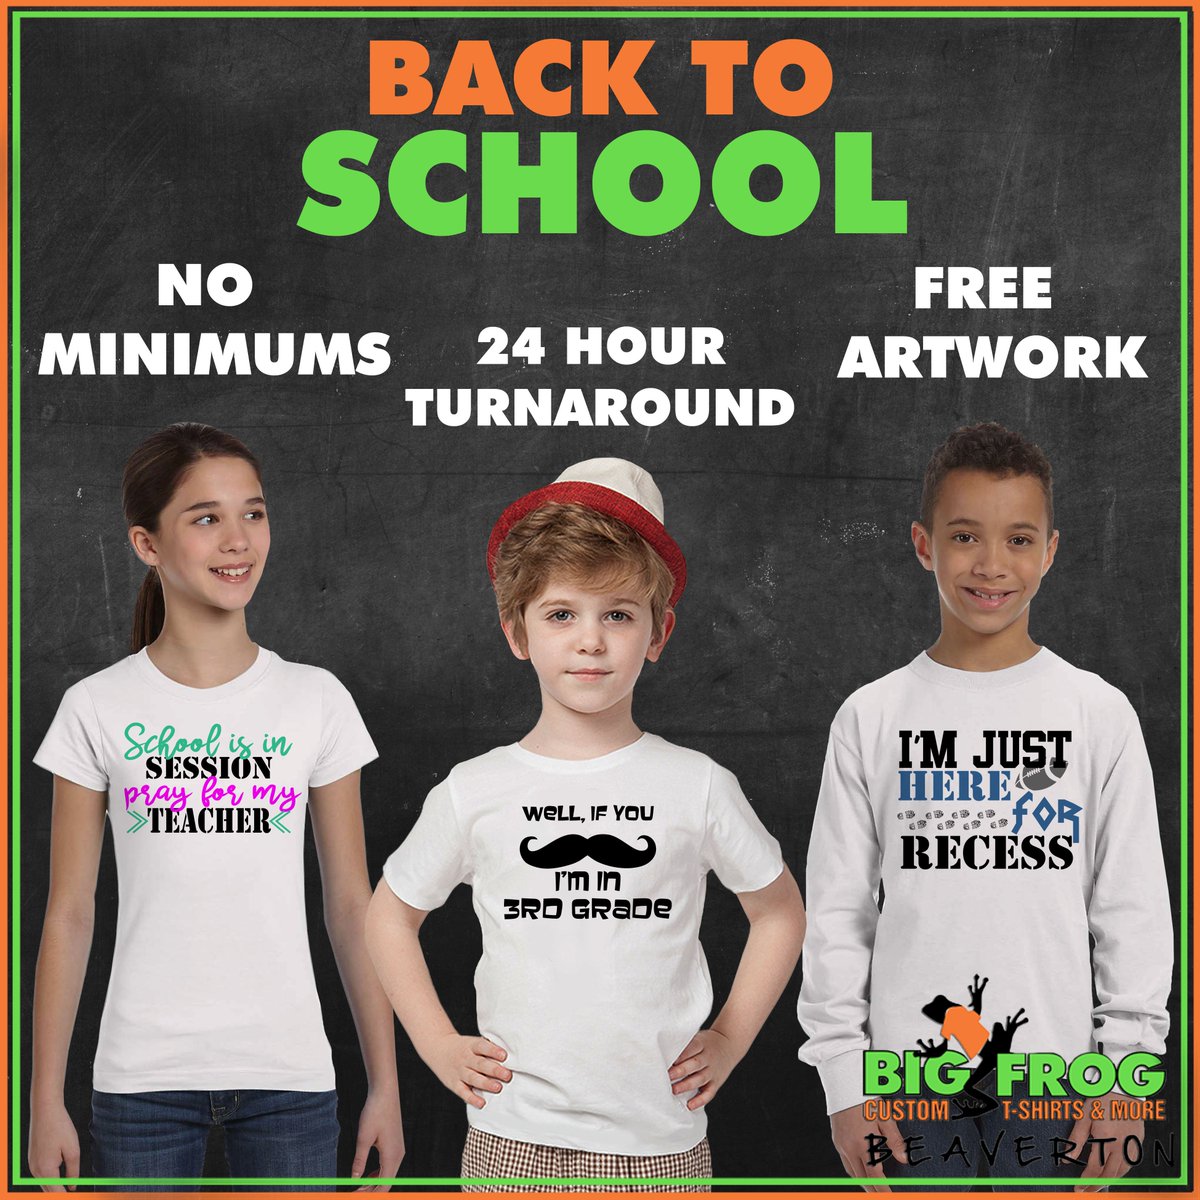 It's that time of year for back to school shopping! Stop by our shop to get your kiddos some unique shirts for the new year! fast turnarounds, no minimums, free artwork 
 #backtoschool #schoolpride #summervibes #nostalgia #freshclothes #pdx #excitement